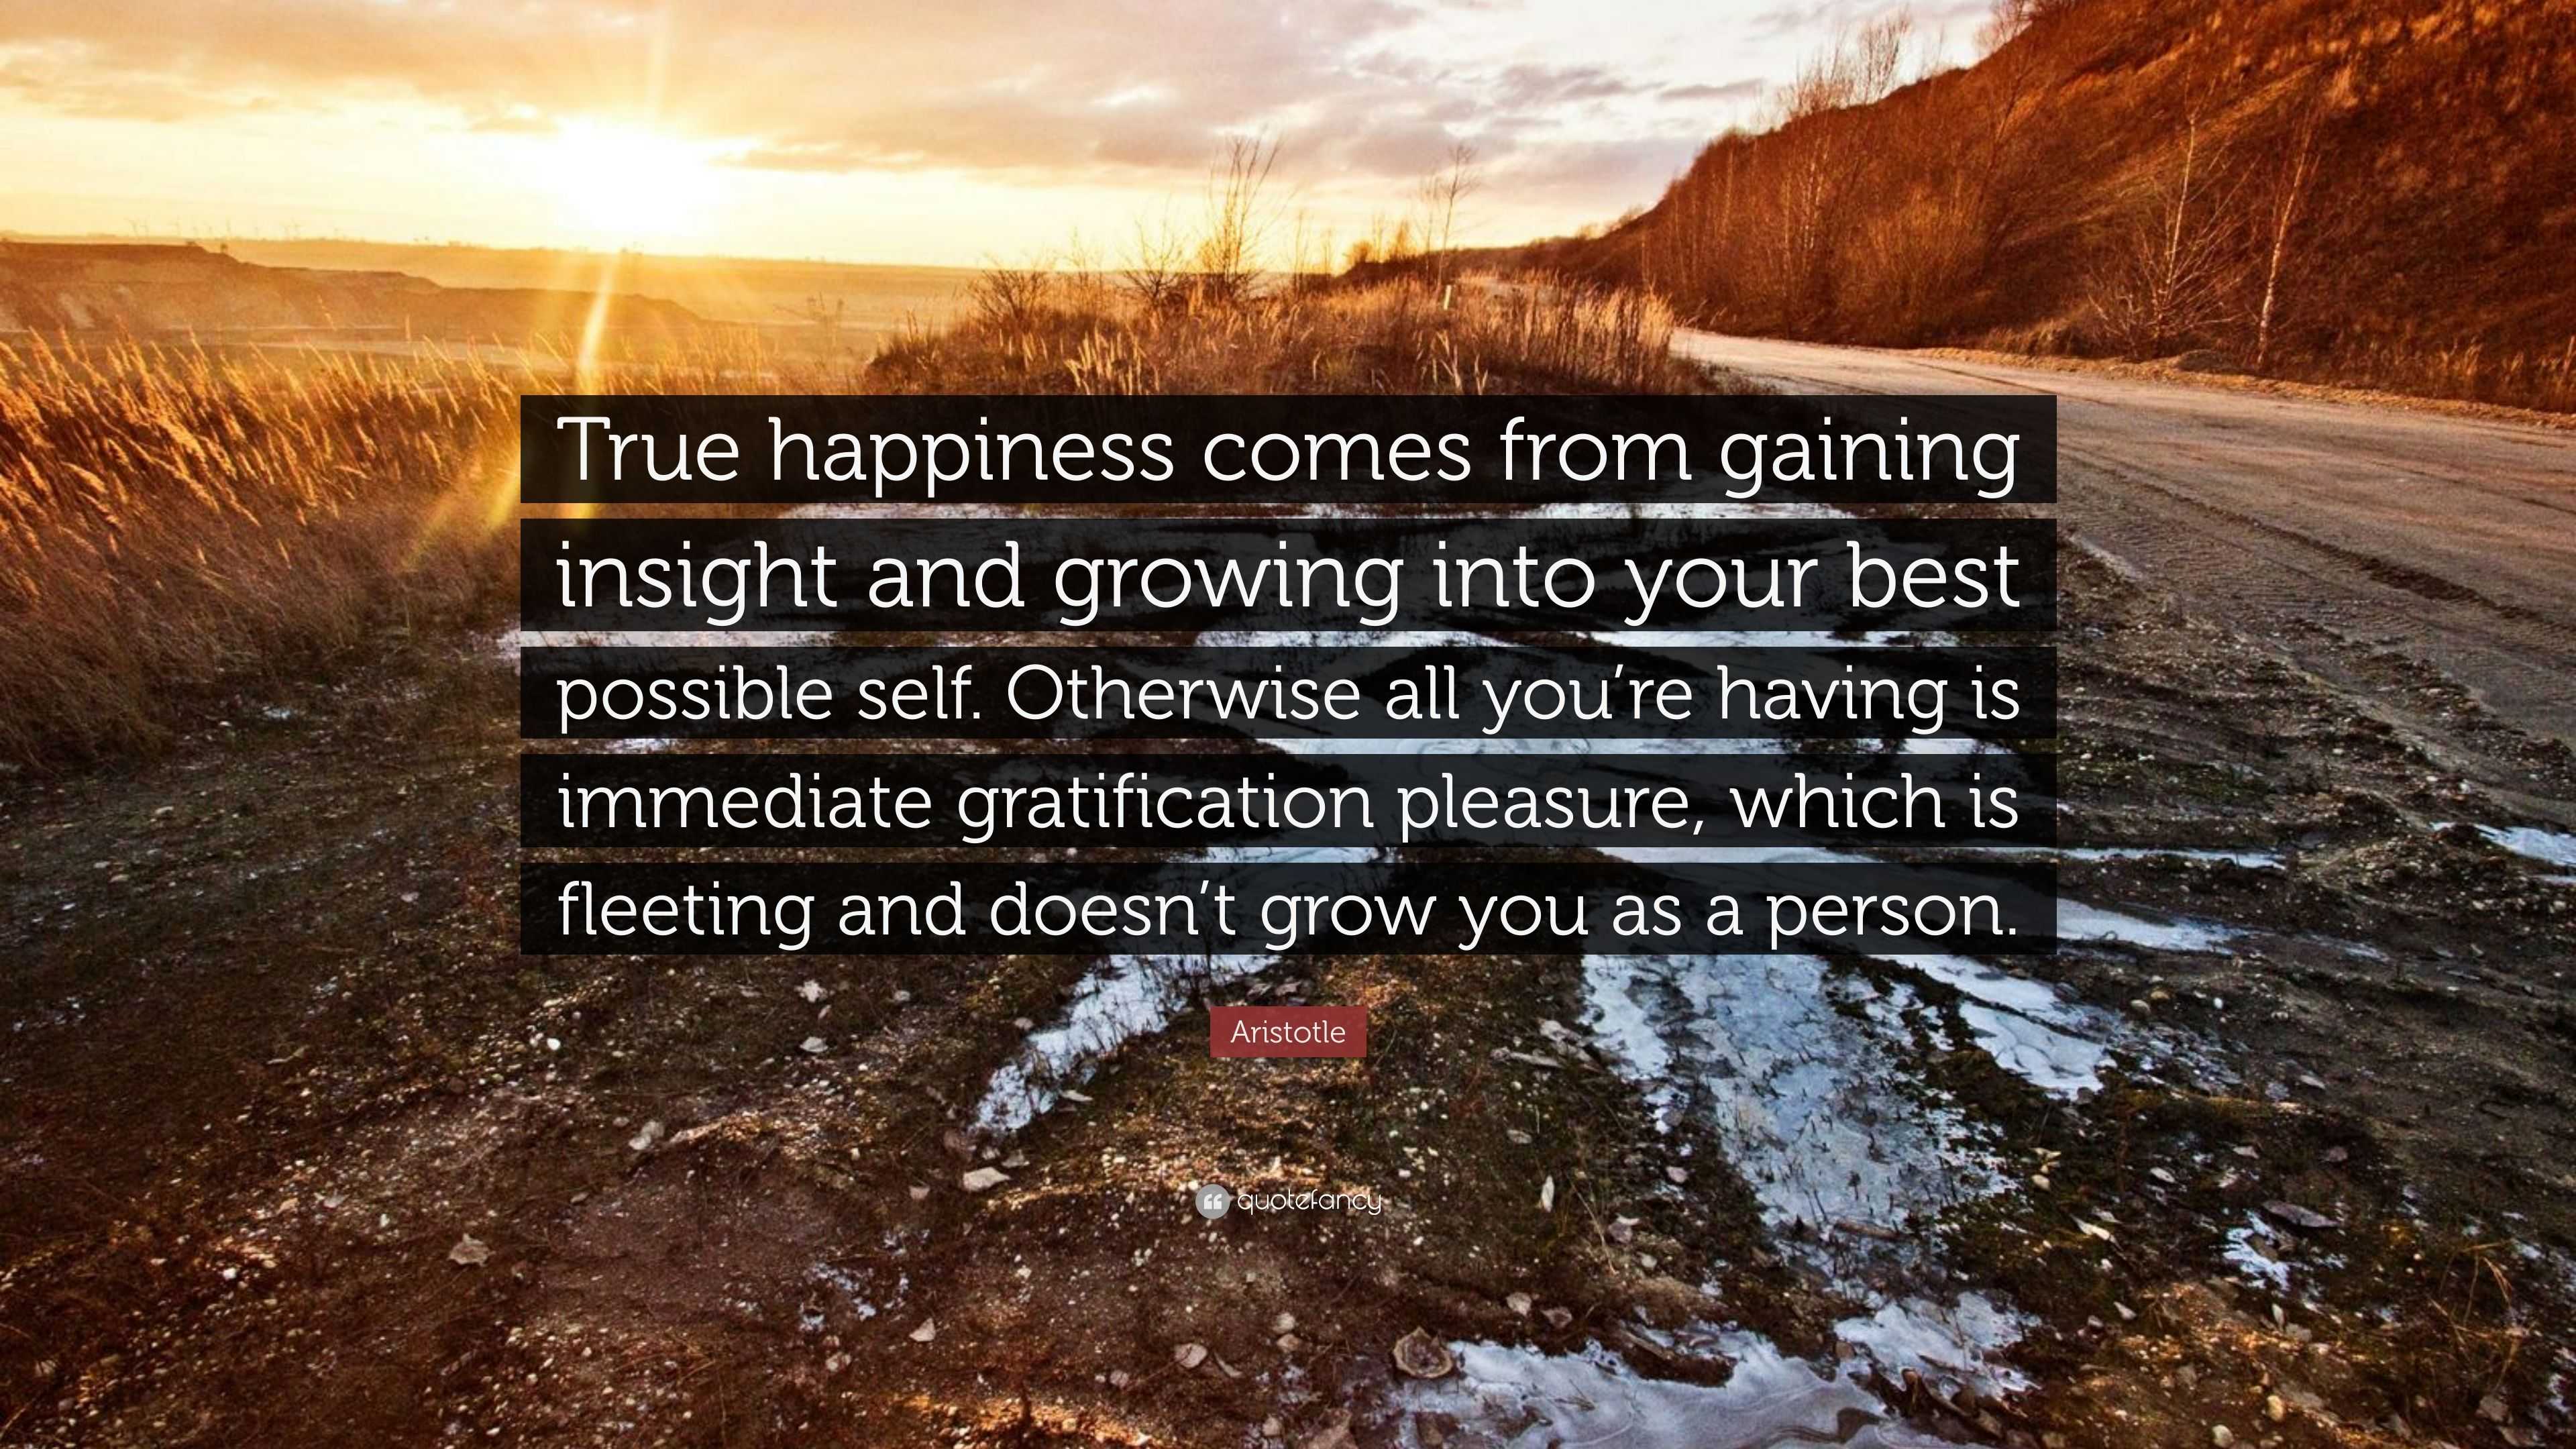 Aristotle Quote: “True happiness comes from gaining insight and growing